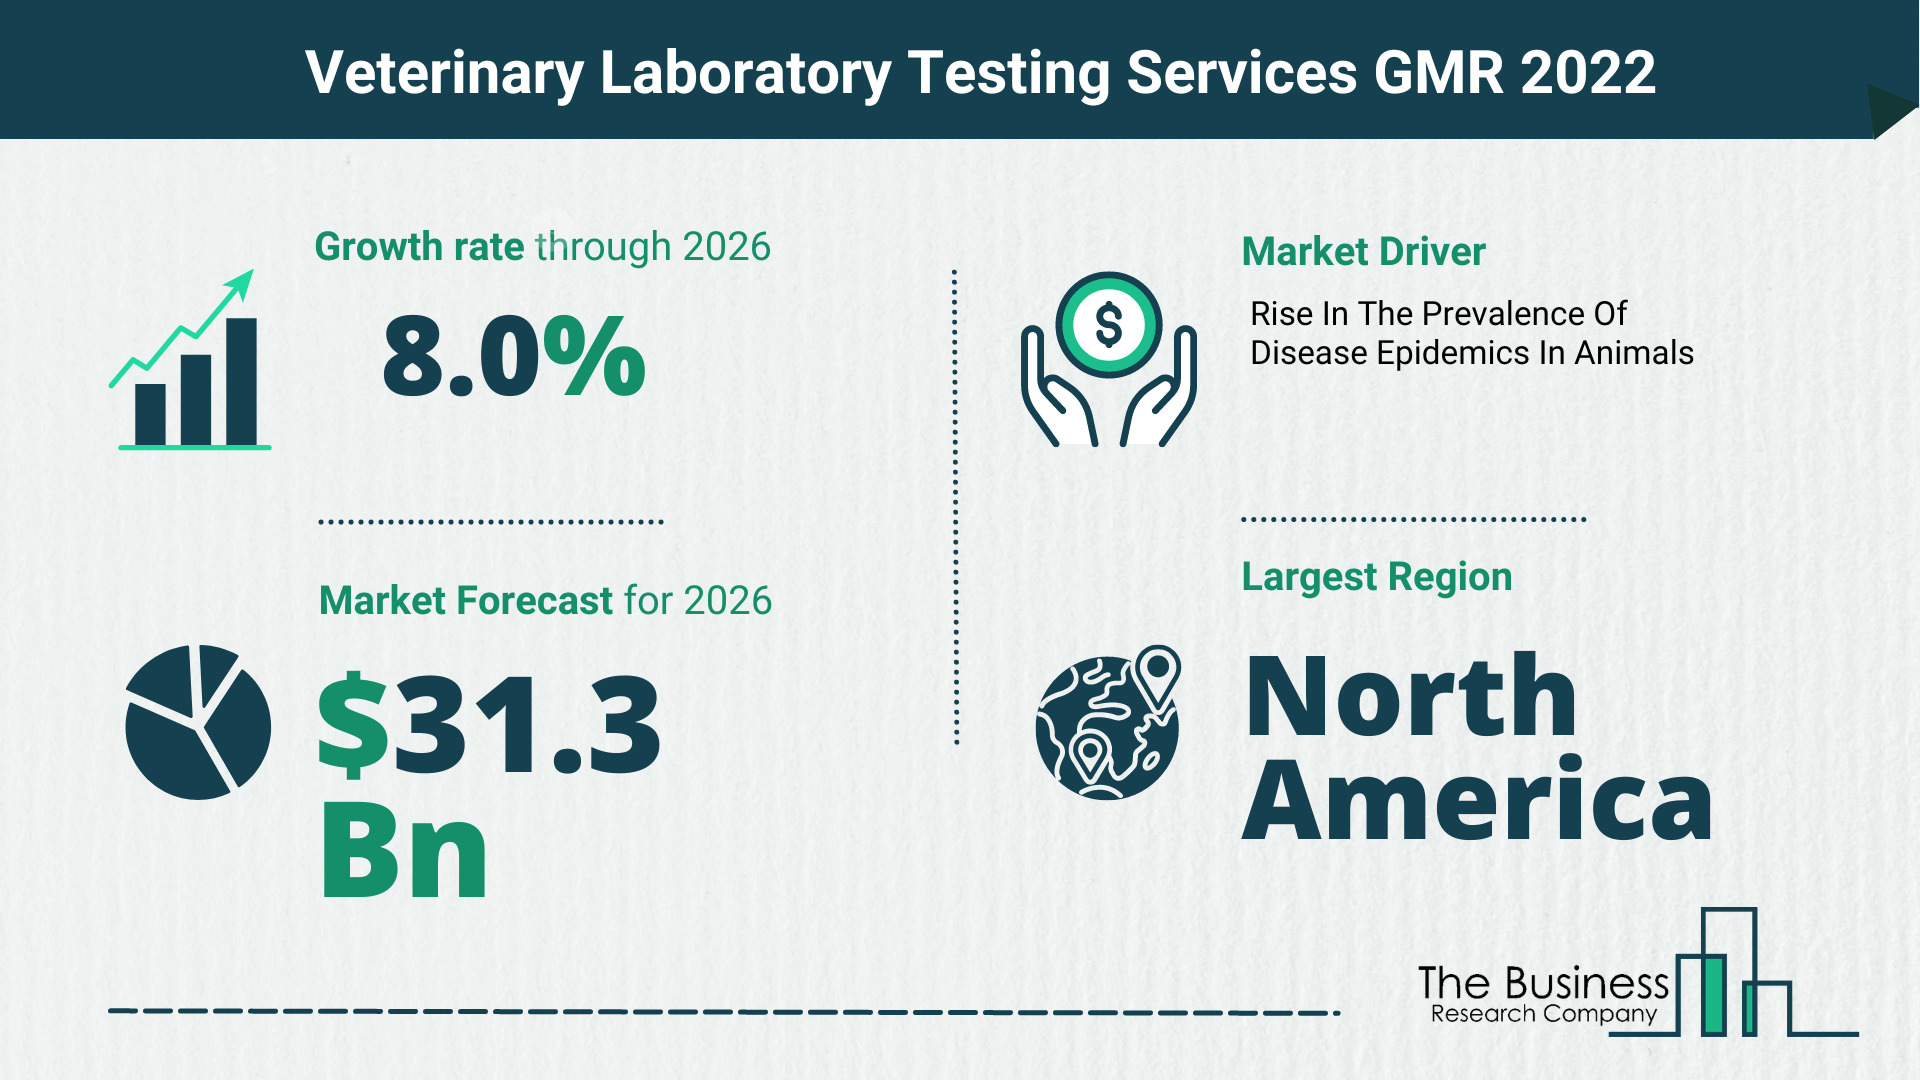 Global Veterinary Laboratory Testing Services Market 2022 – Market Opportunities And Strategies